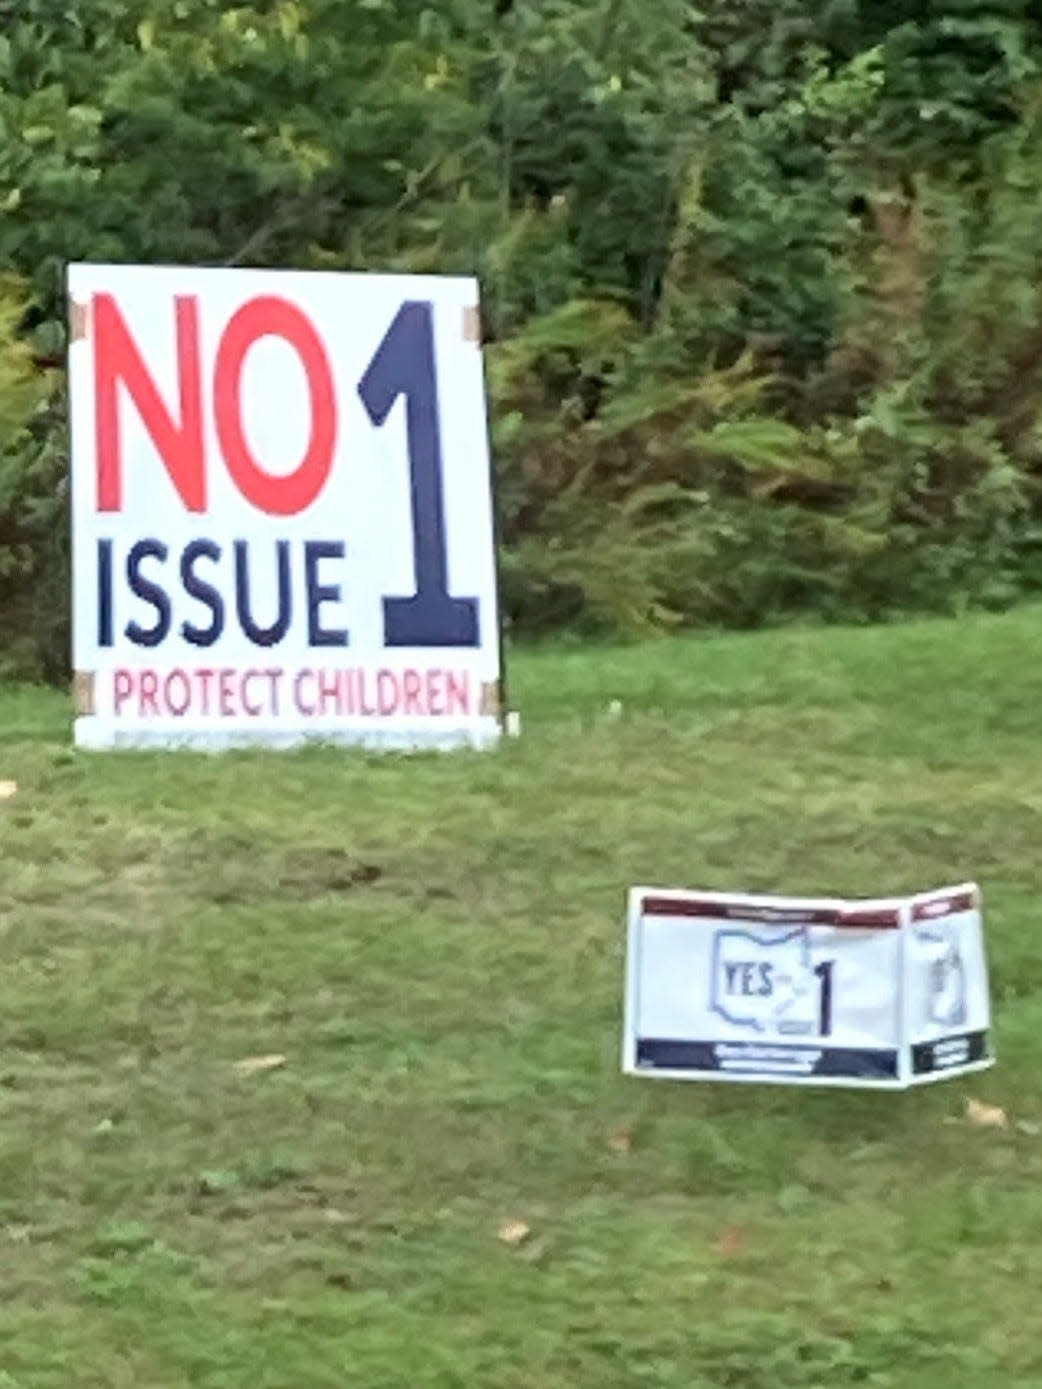 Issue 1 signs in eastern Hamilton County.